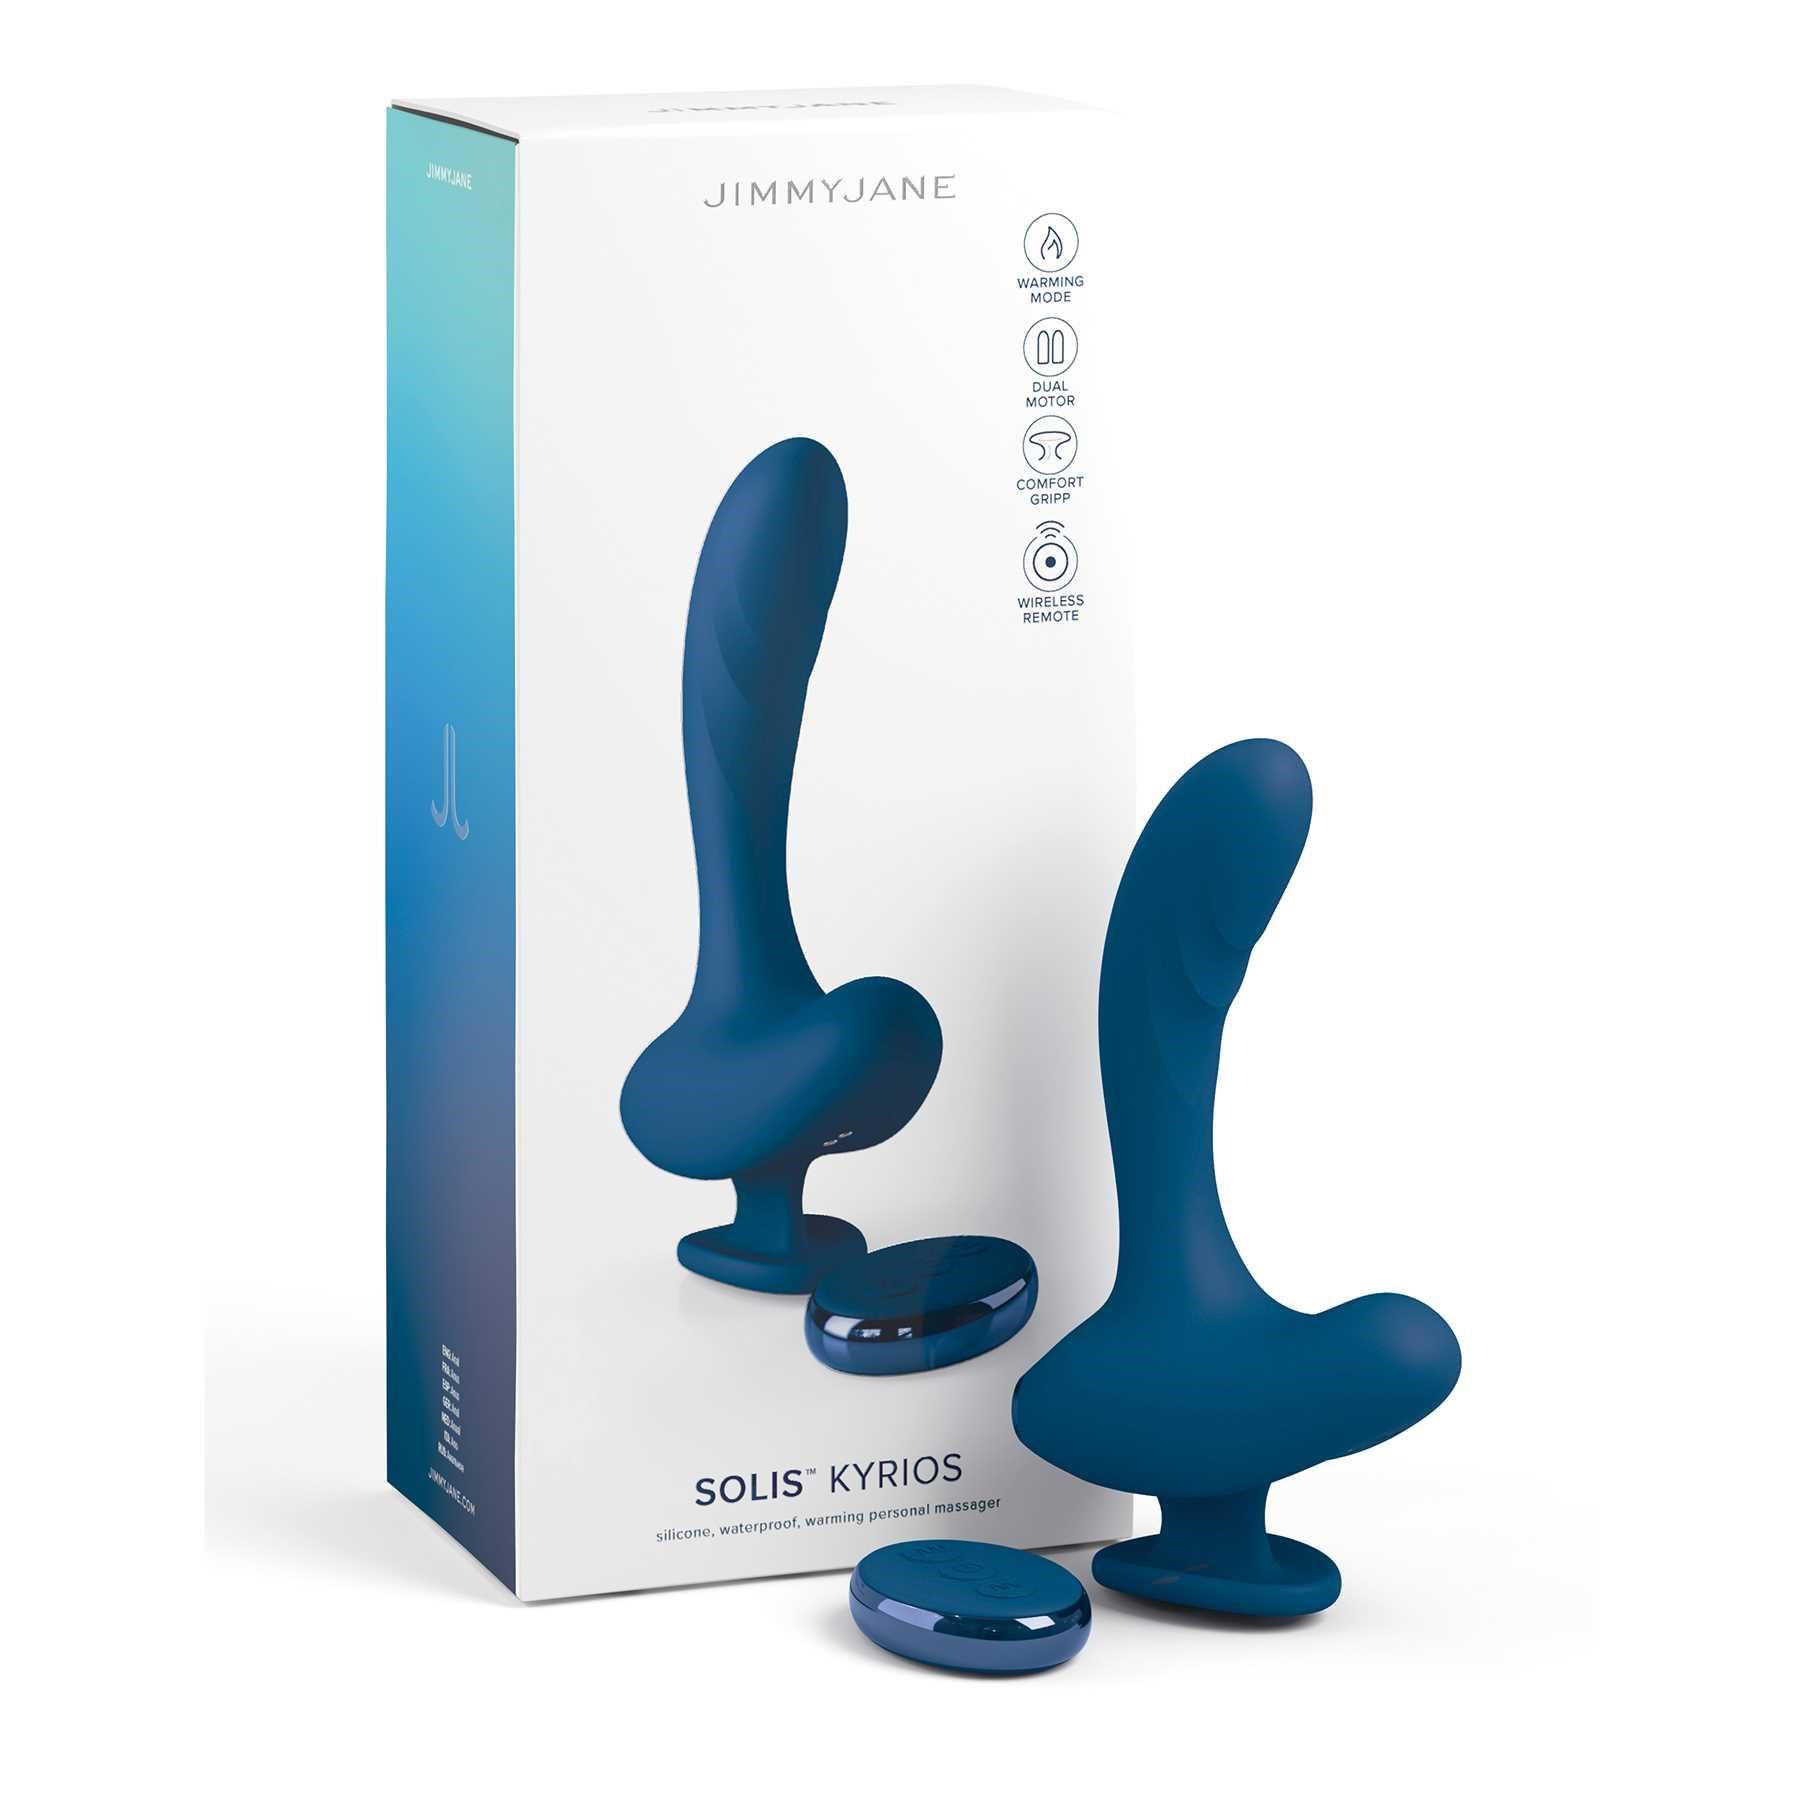 JIMMY JANE SOLIS KYRIOS P-SPOT MASSAGER with box